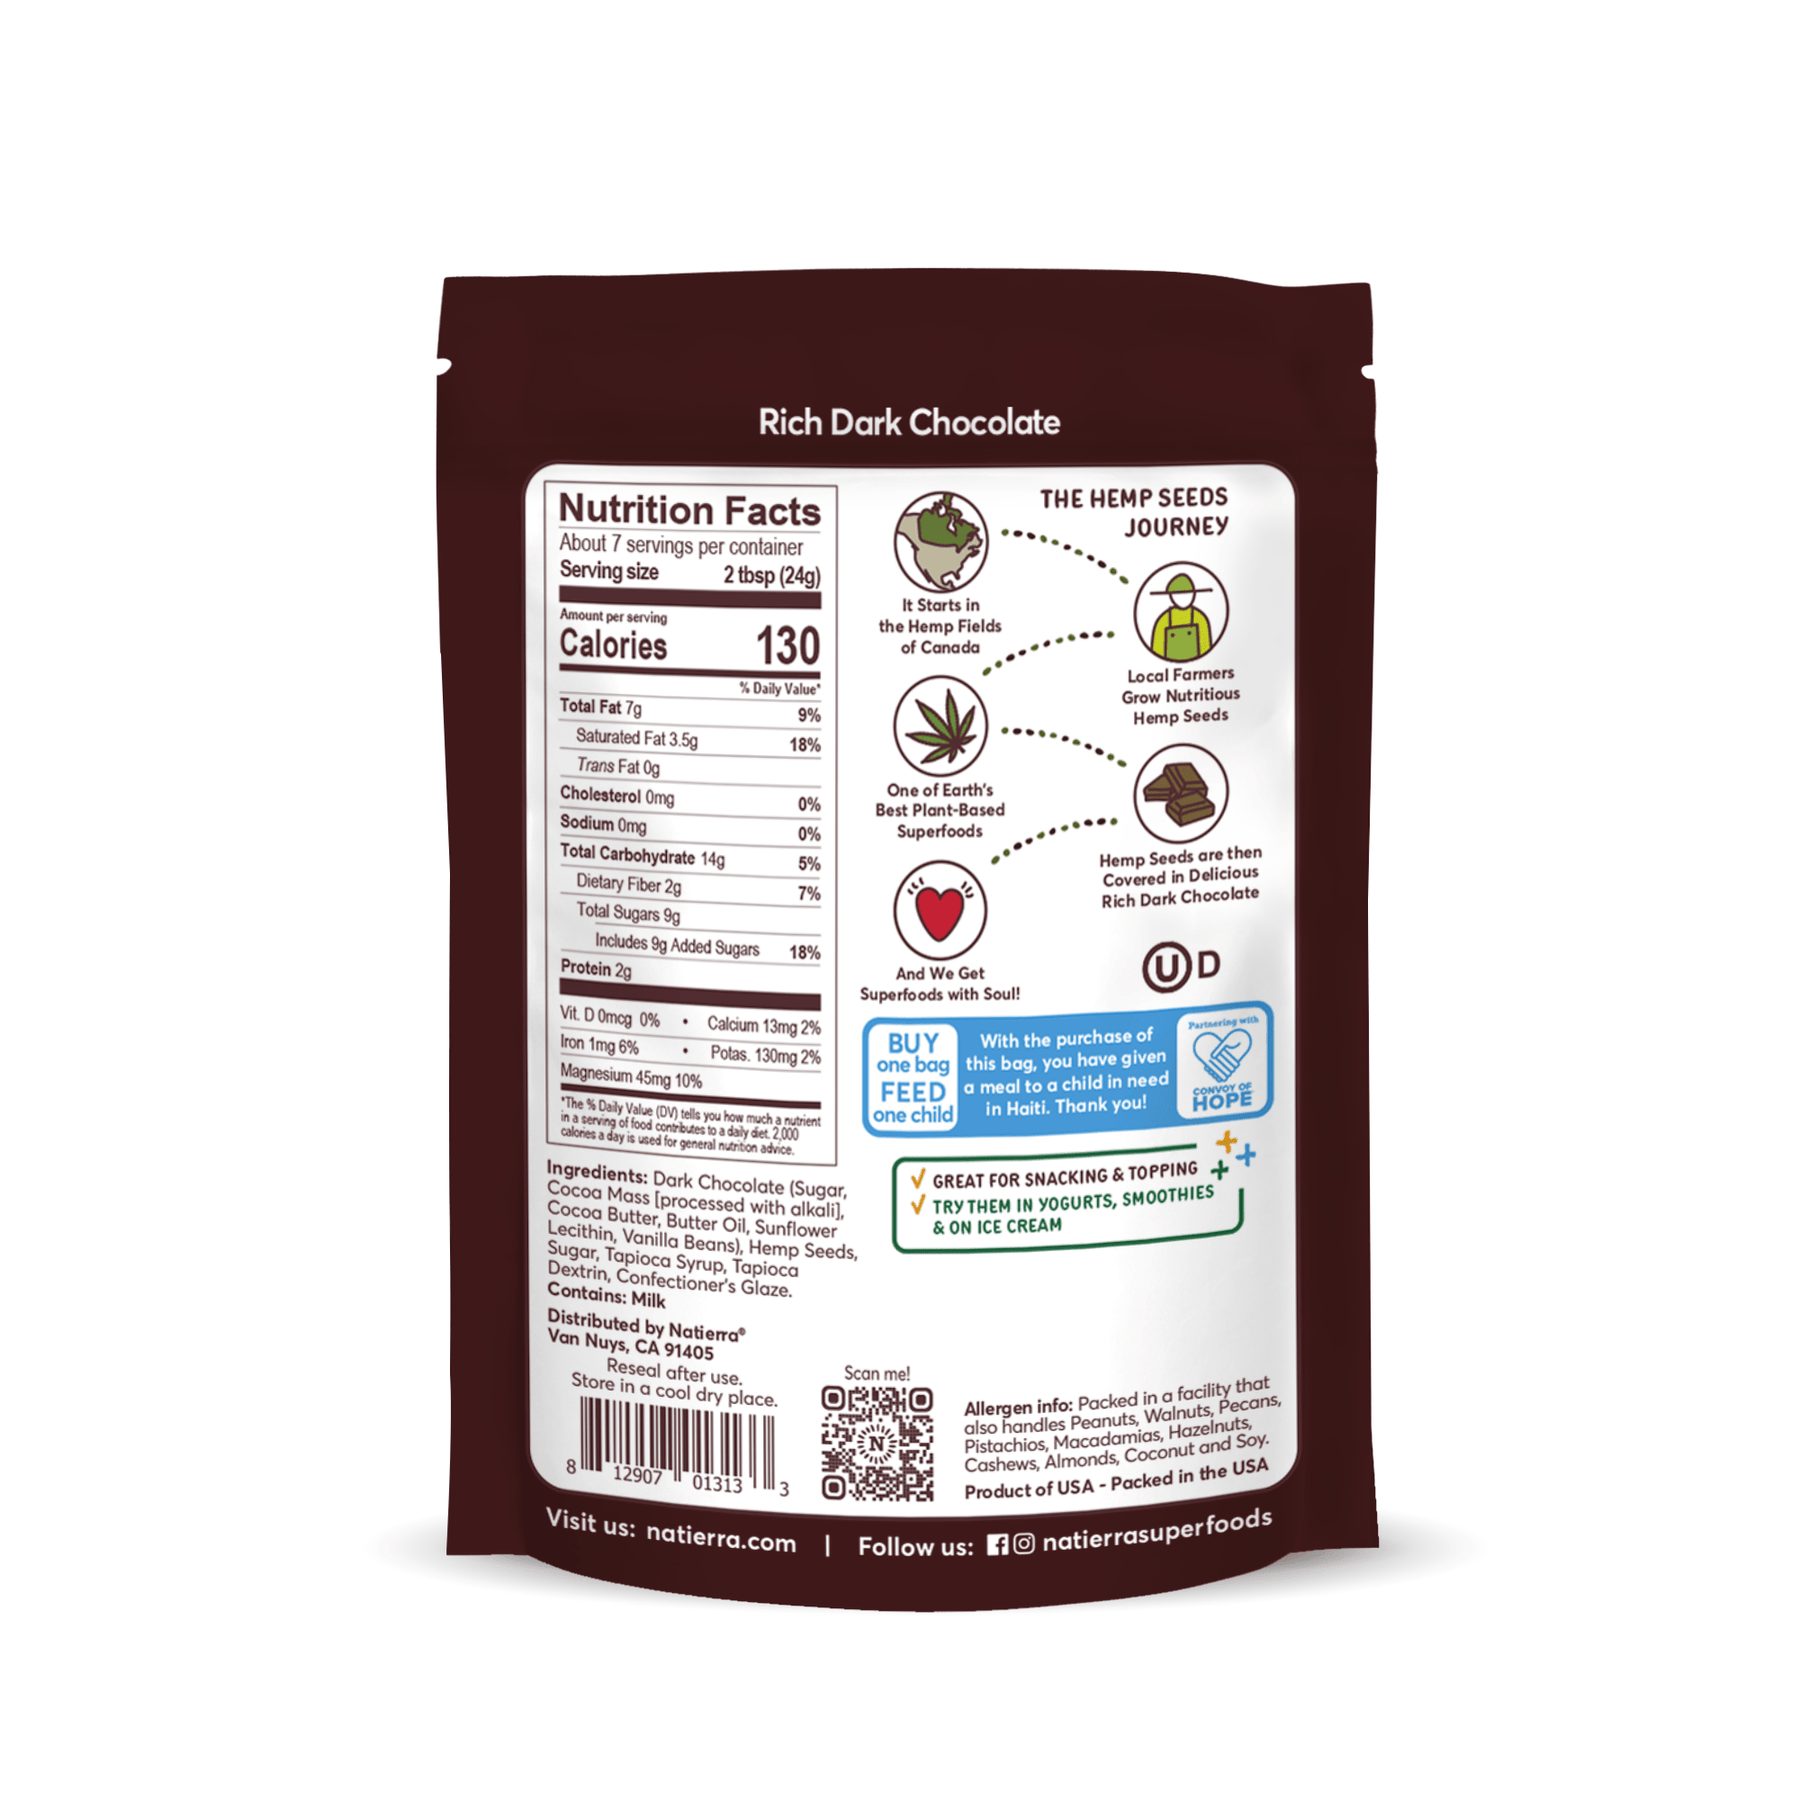 Natierra Dark Chocolate Hemp Seeds nutrition facts, journey and product claims